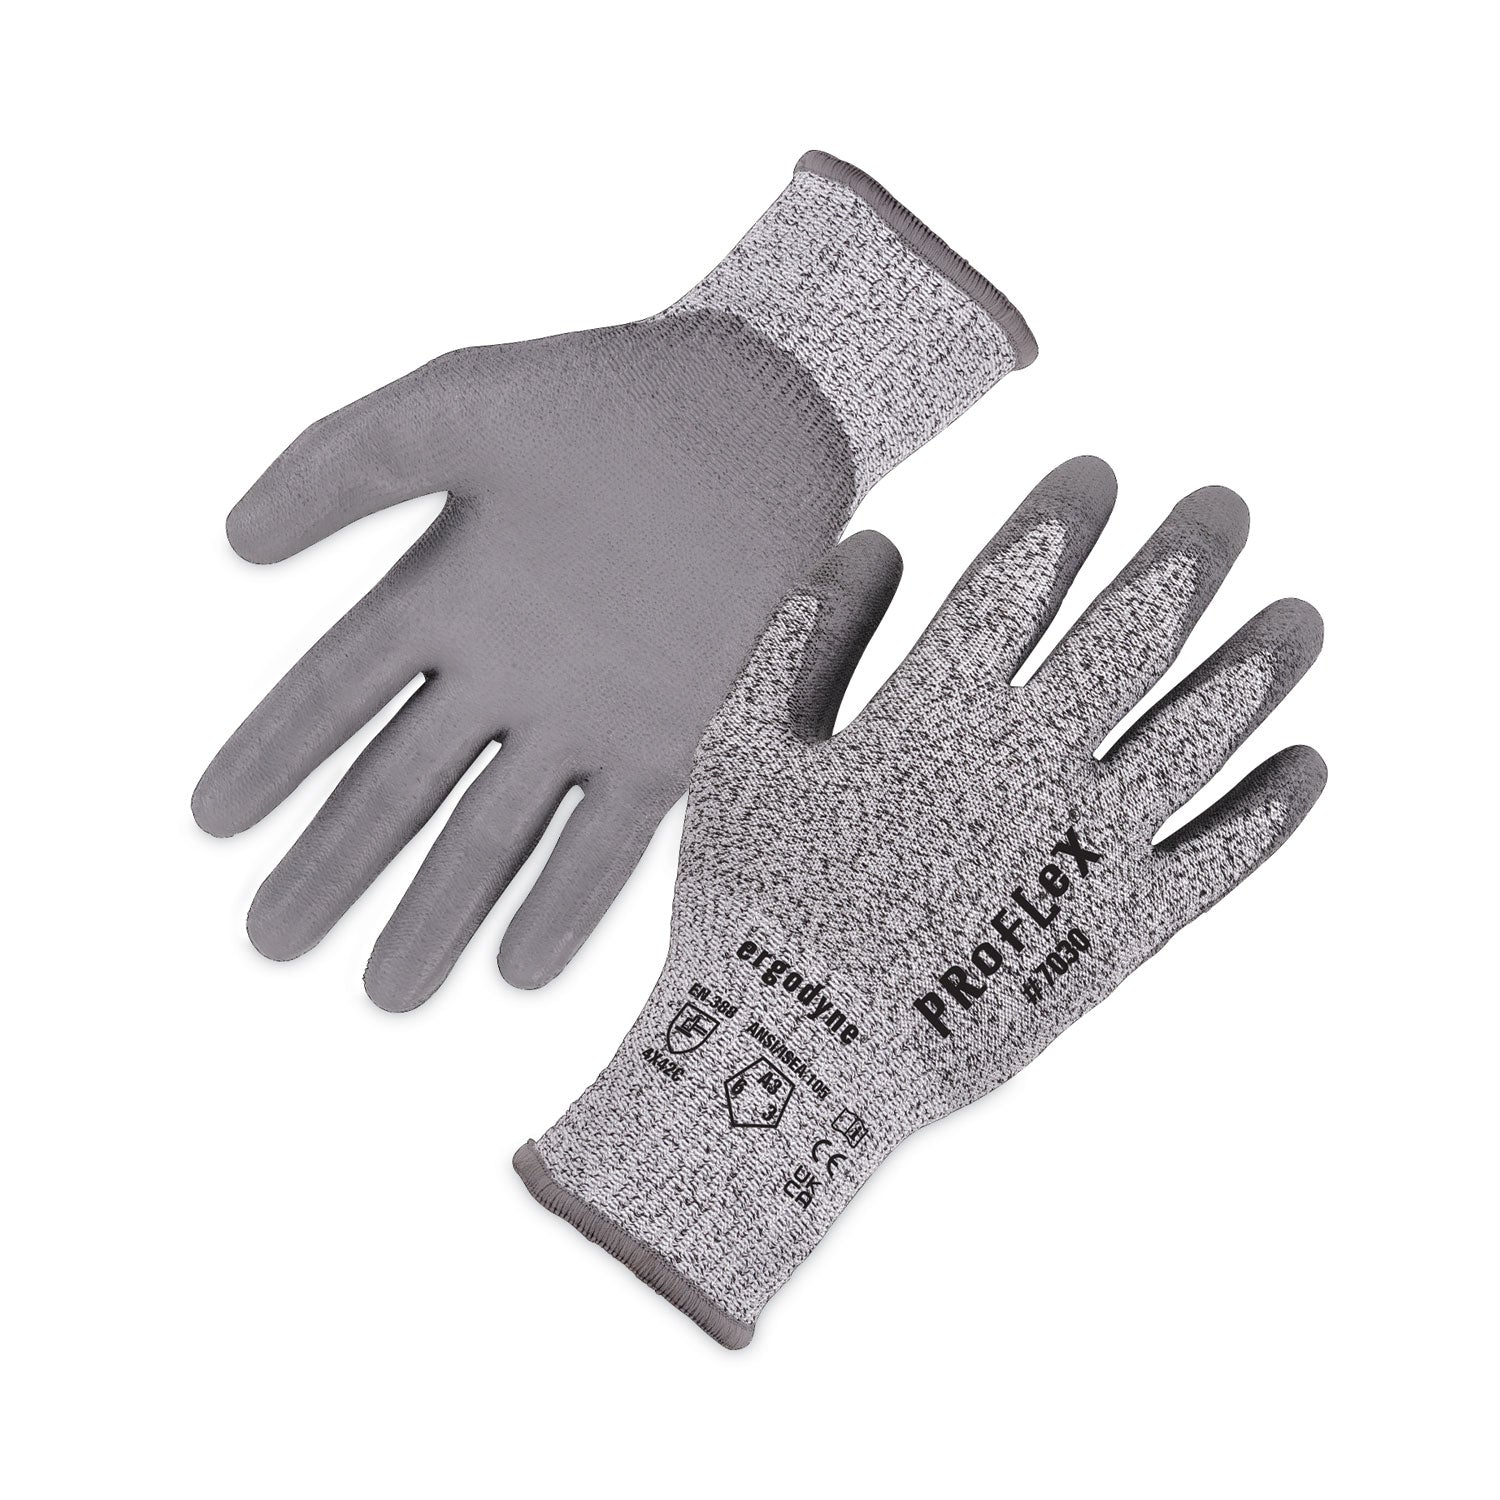 proflex-7030-ansi-a3-pu-coated-cr-gloves-gray-medium-12-pairs-pack-ships-in-1-3-business-days_ego10453 - 1